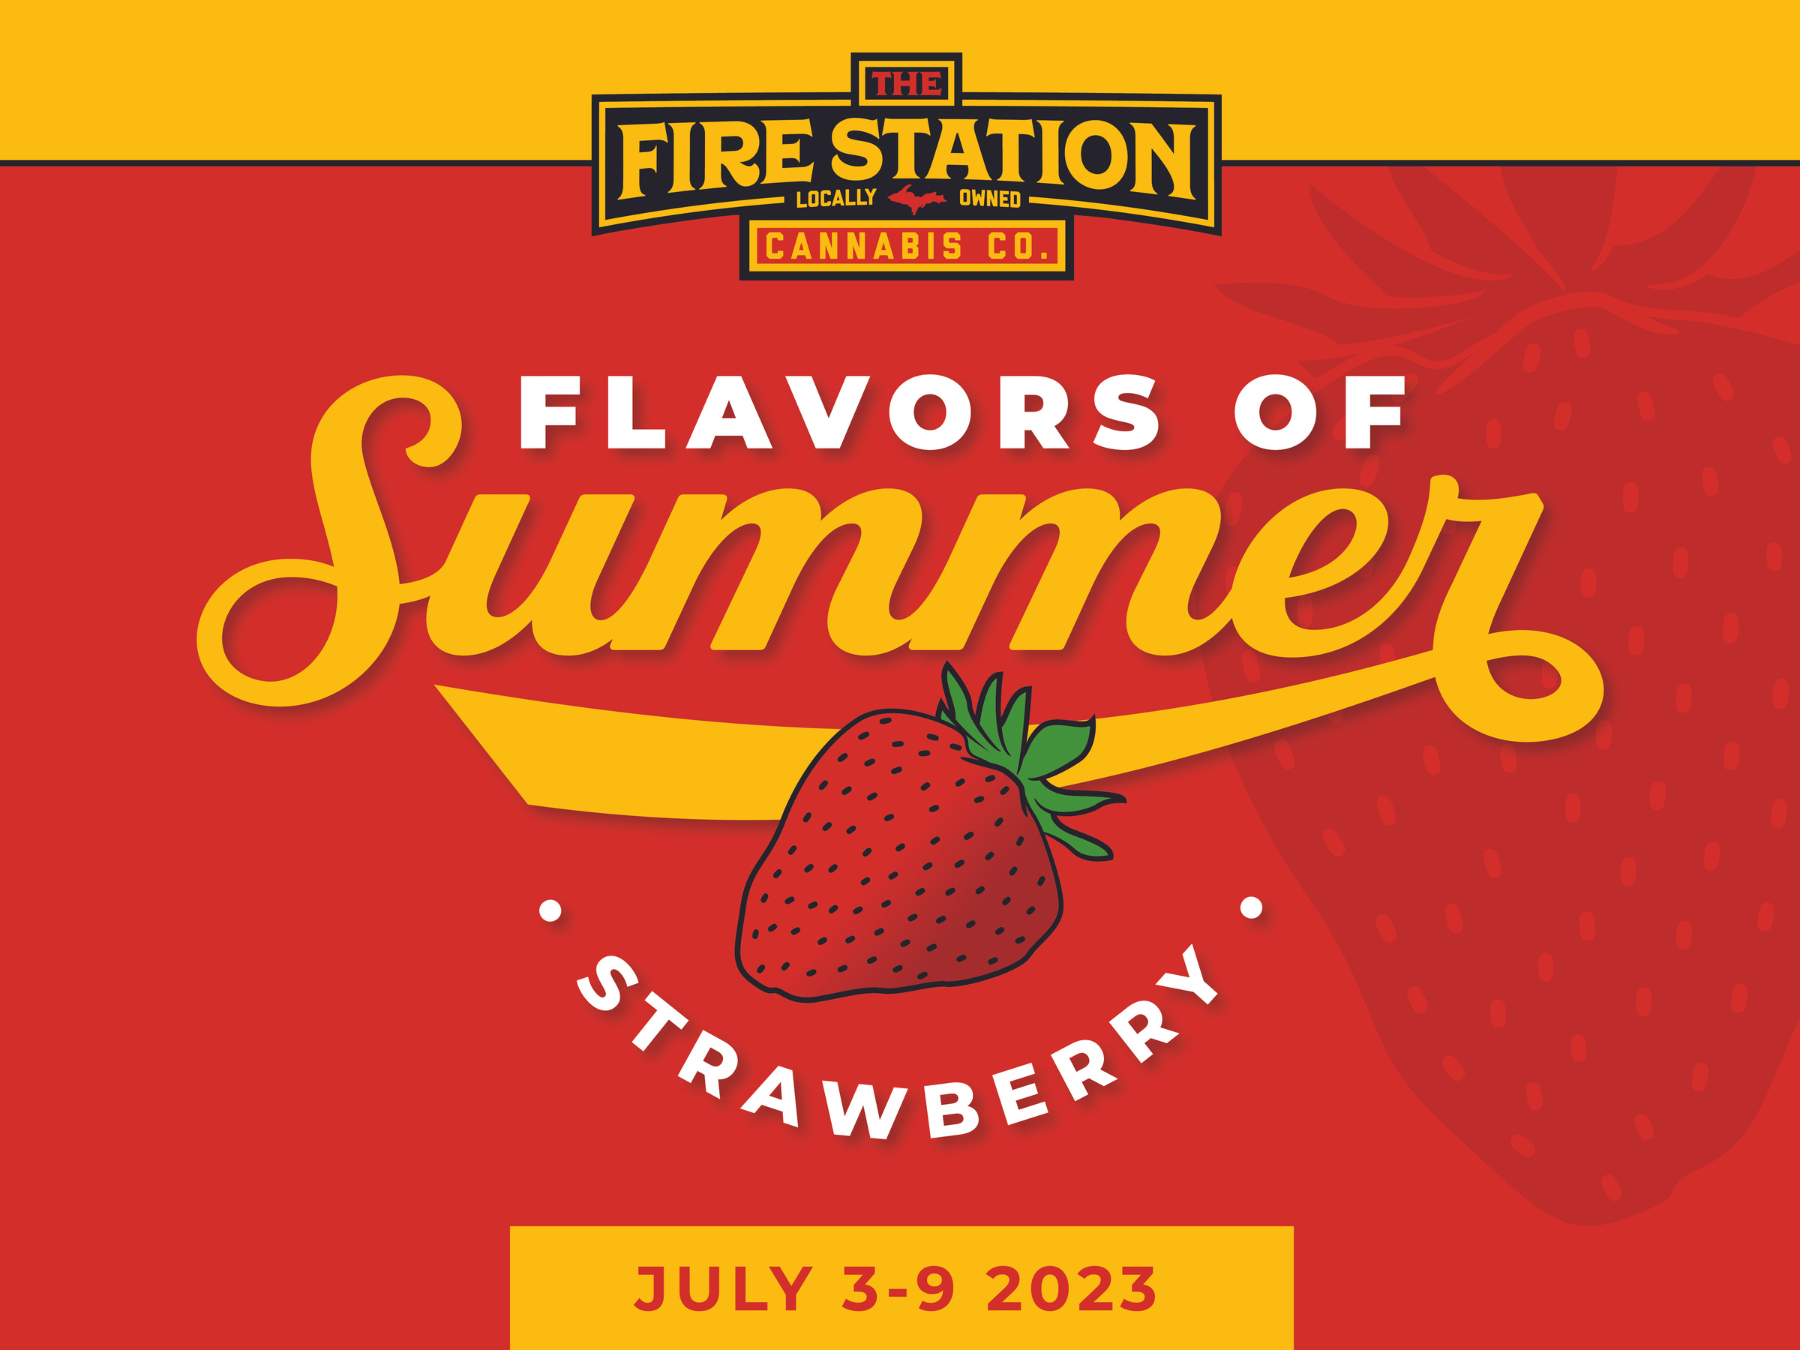 Shop strawberry in The Fire Station's Flavor of Summer sale on edibles.